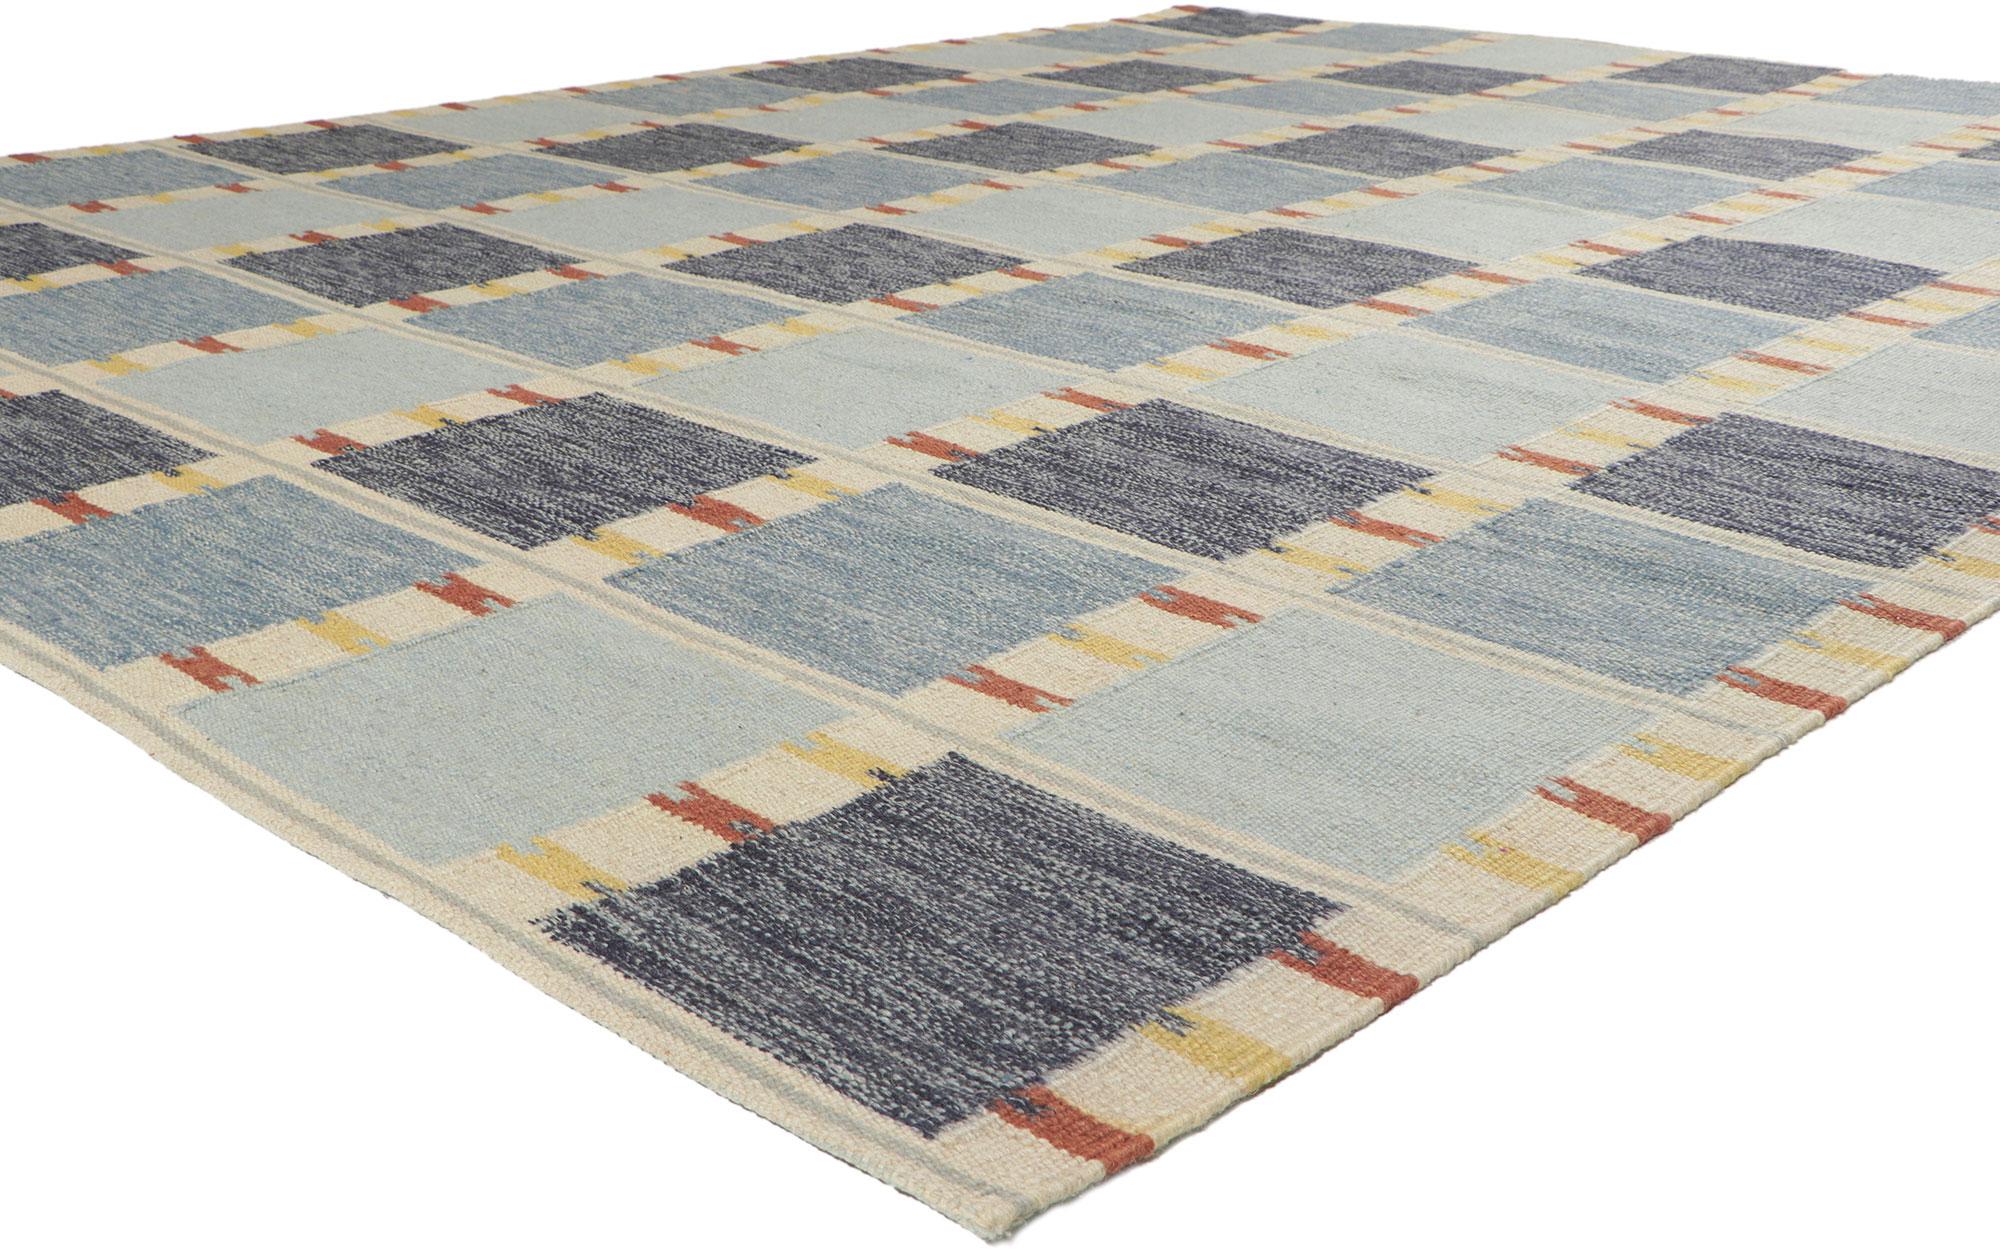 30852 New Swedish Barbro Nilsson Inspired Kilim Rug, 09'02 x 11'07. Emanating Scandinavian Modern style with incredible detail and texture, this handwoven Swedish style kilim rug is a captivating vision of woven beauty. The eye-catching check